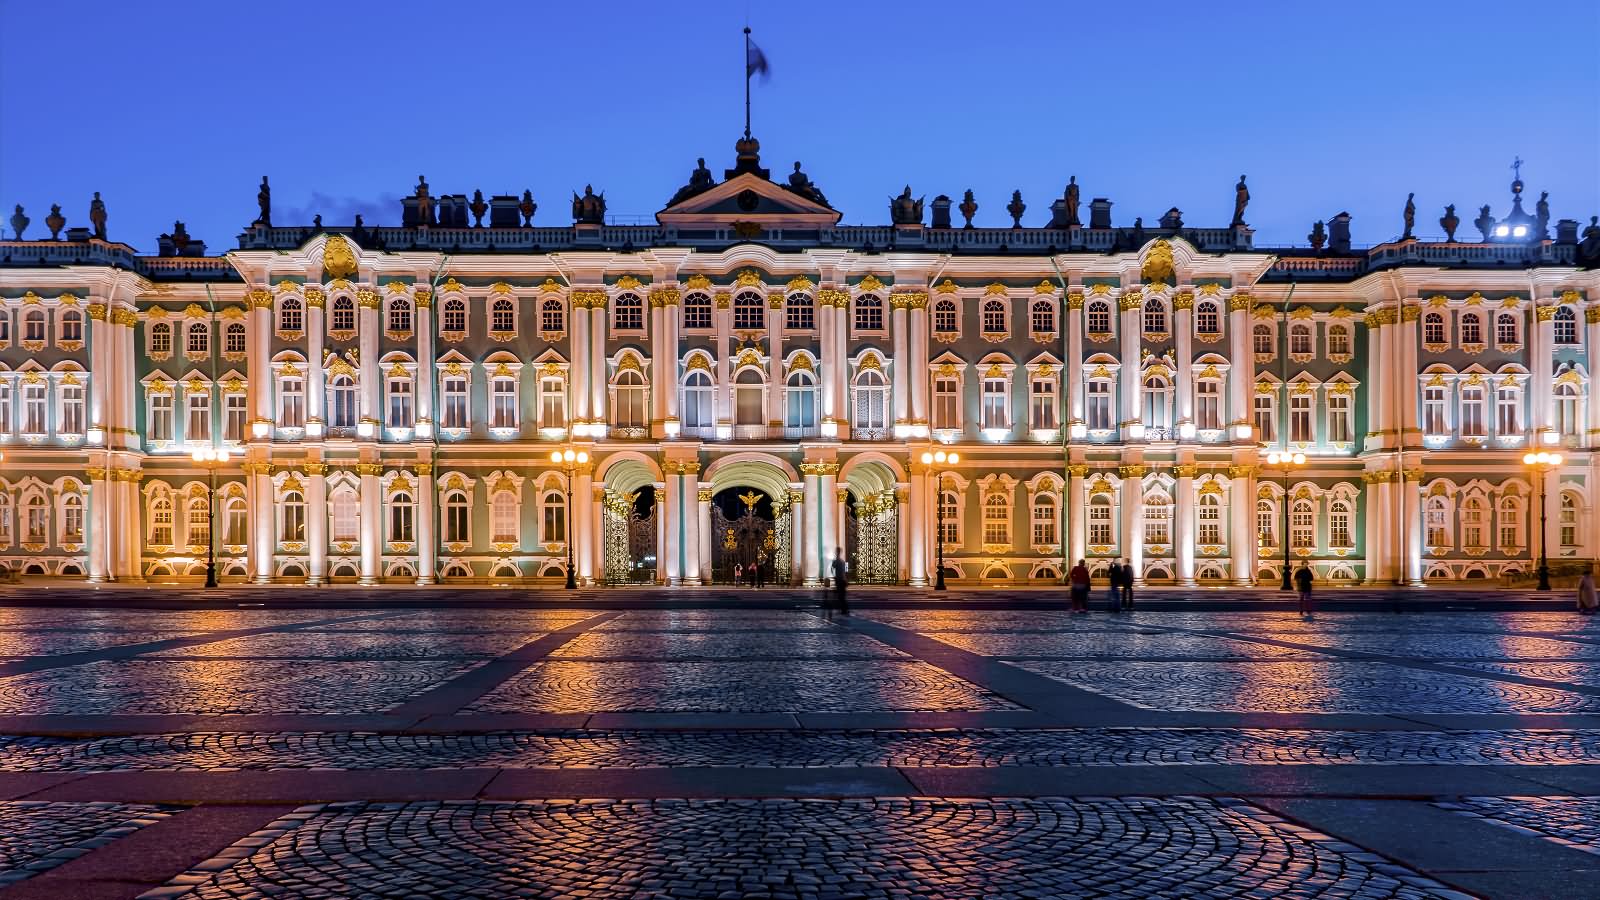 Front View Of The Hermitage Museum, St. Petersburg During Night